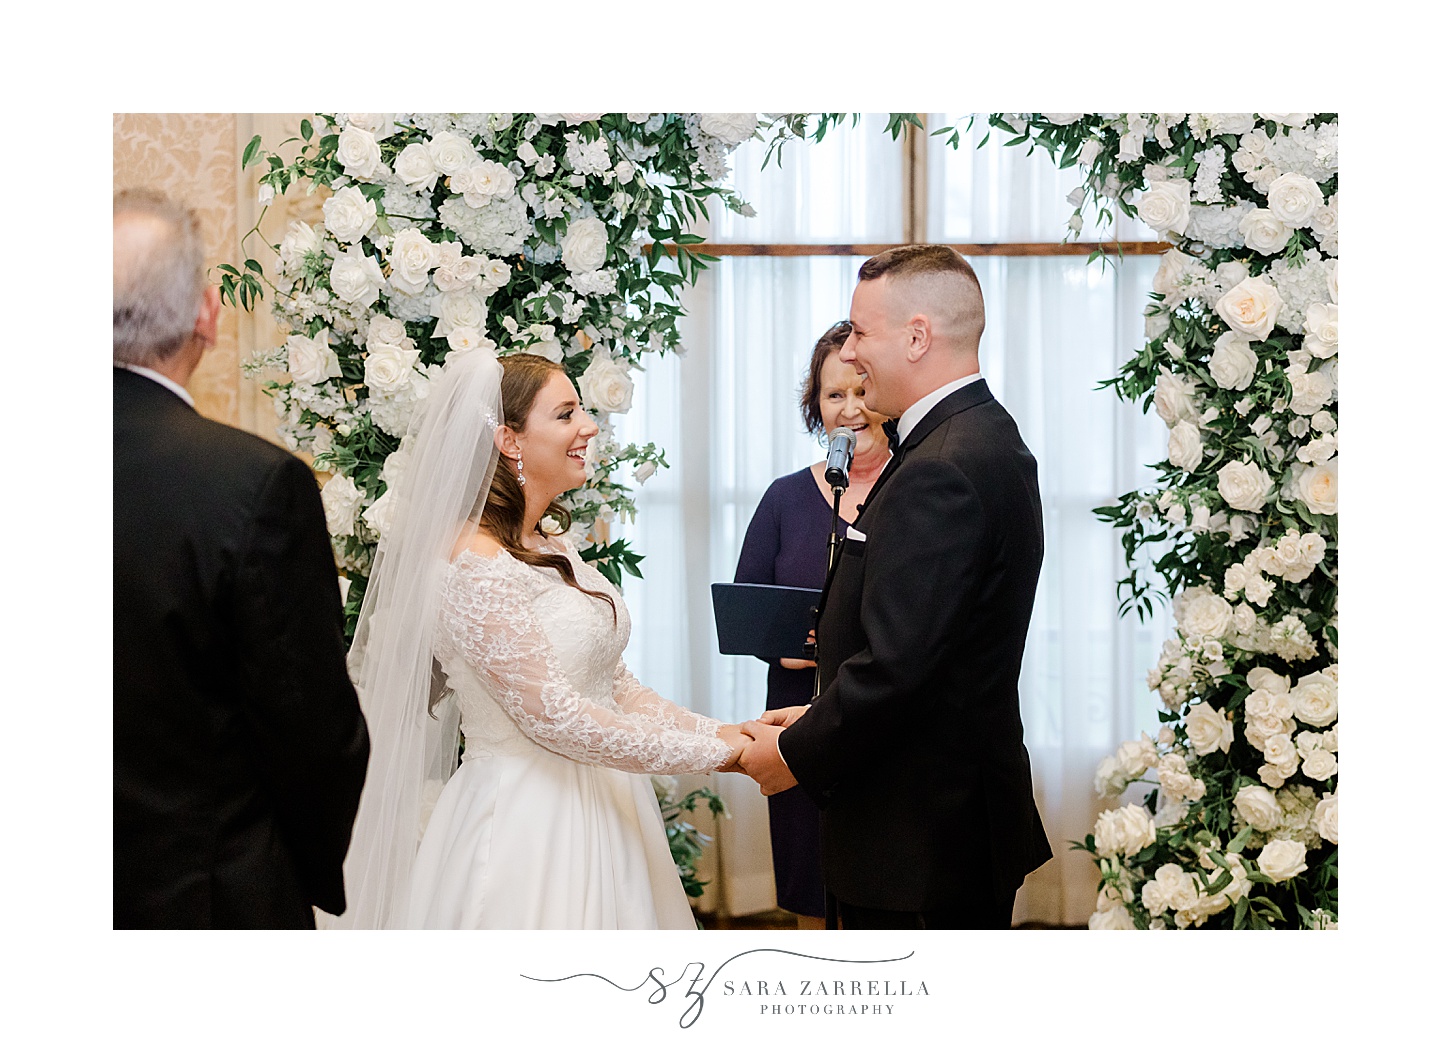  newlyweds stand in front of floral arbor inside wedding ceremony at Rosecliff Mansion